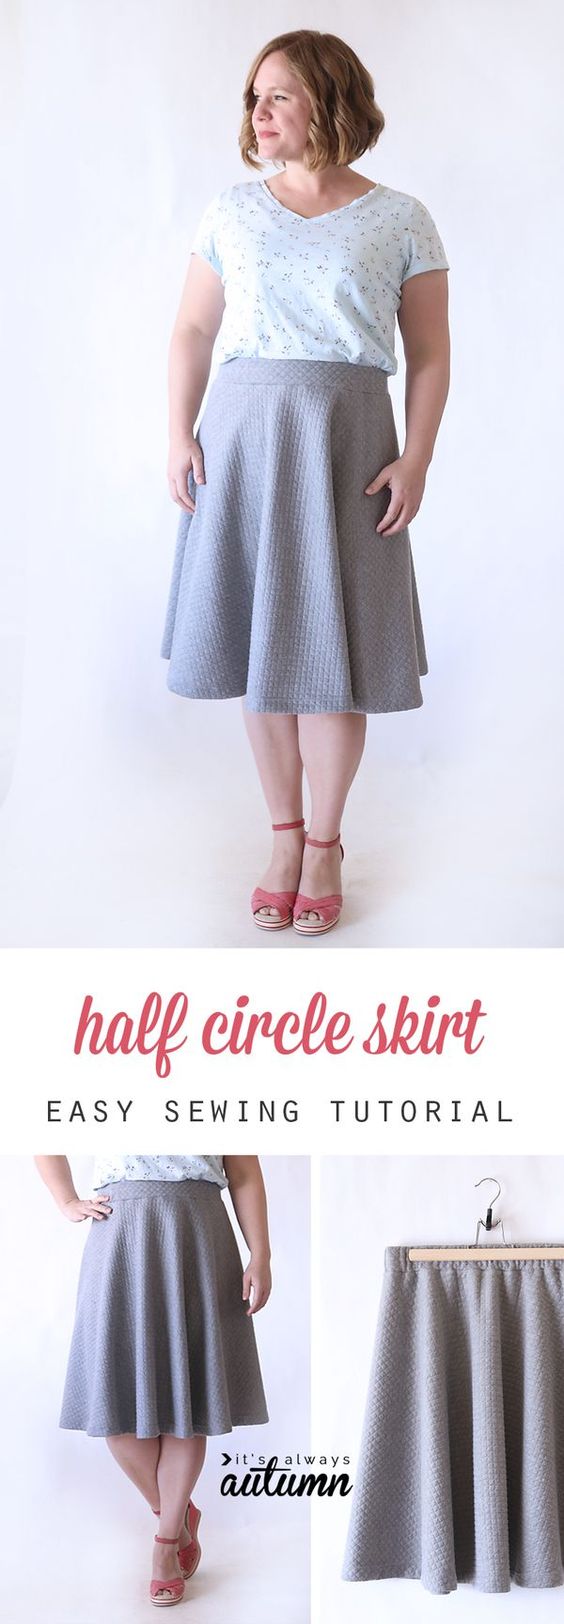 ROUNDUP: 15 easy FREE skirt patterns | On the Cutting Floor: Printable ...